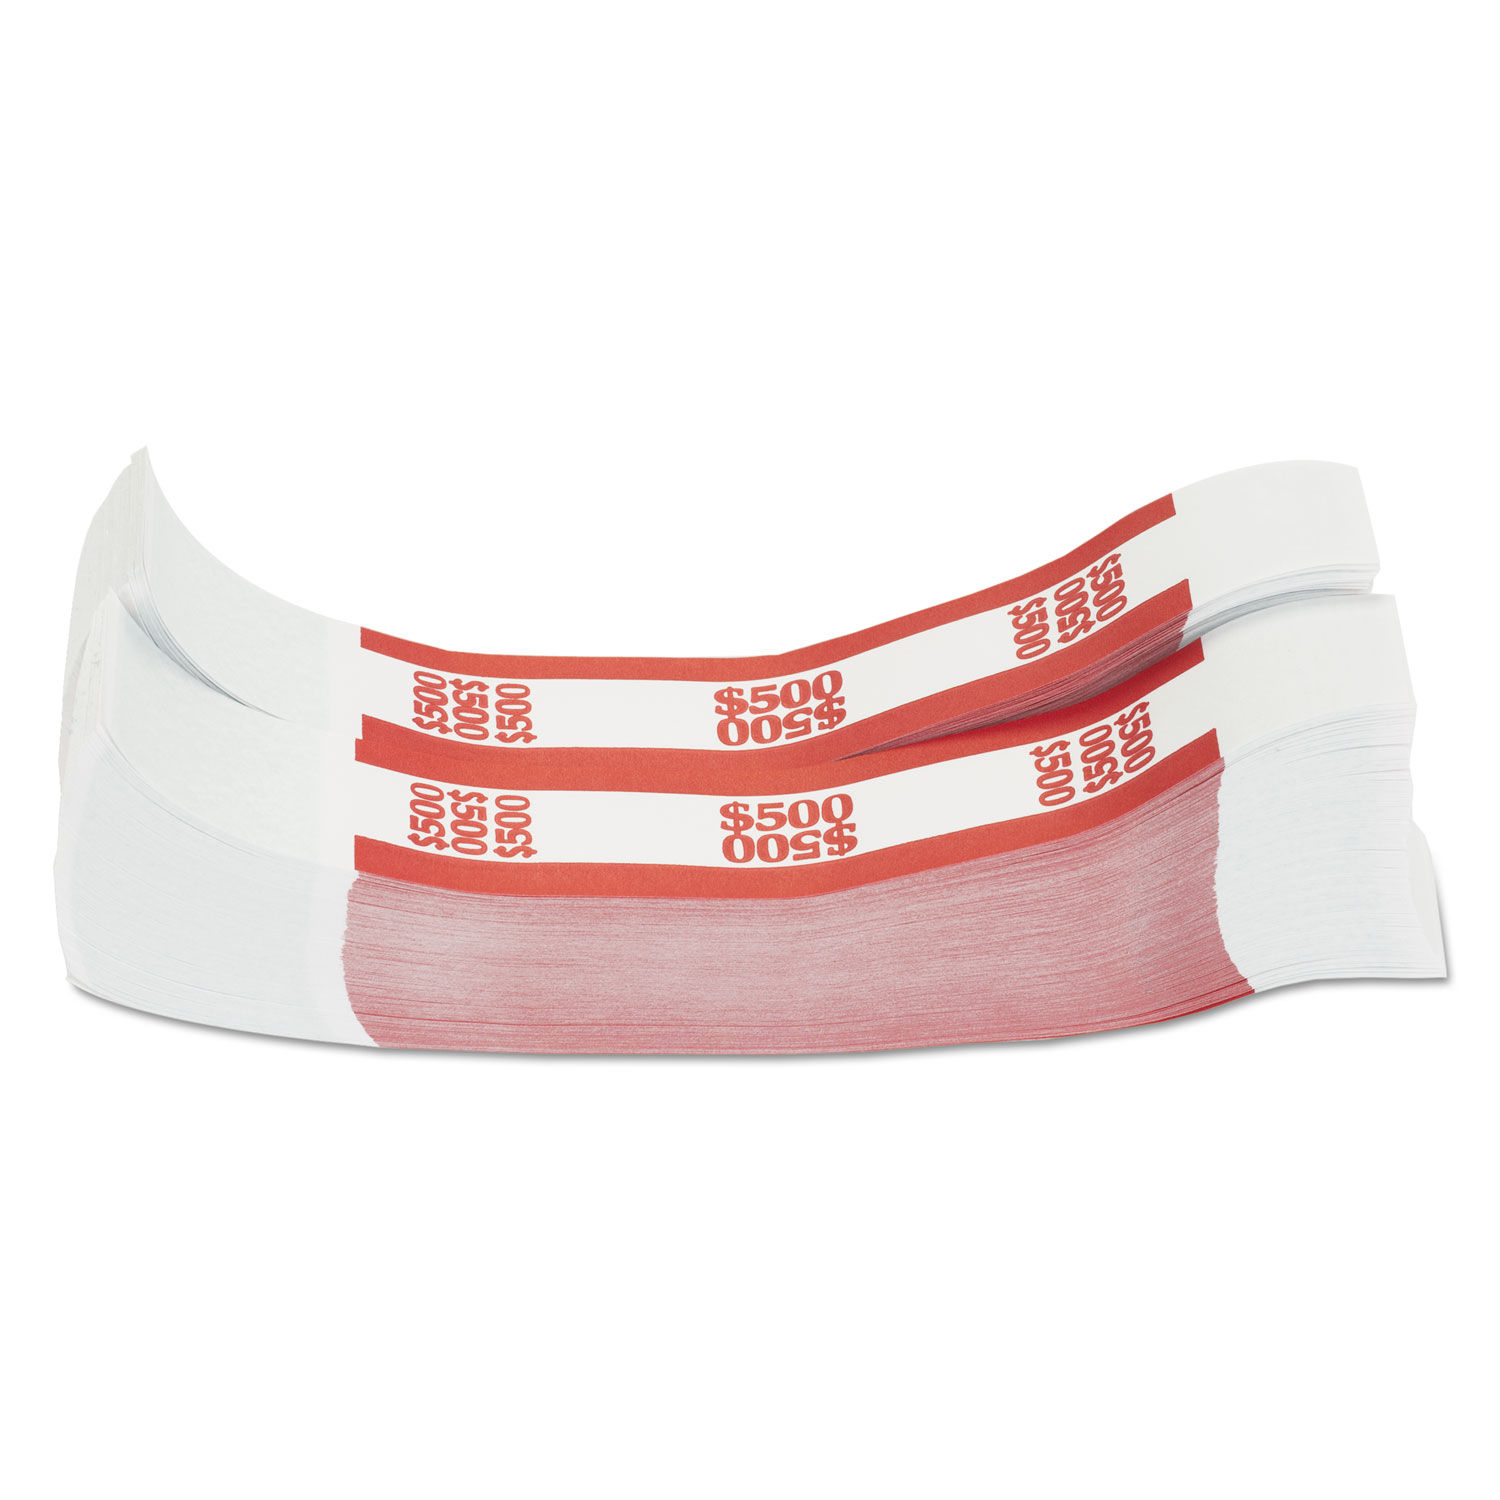 Currency Straps Red, $500 in $5 Bills, 1000 Bands/Pack